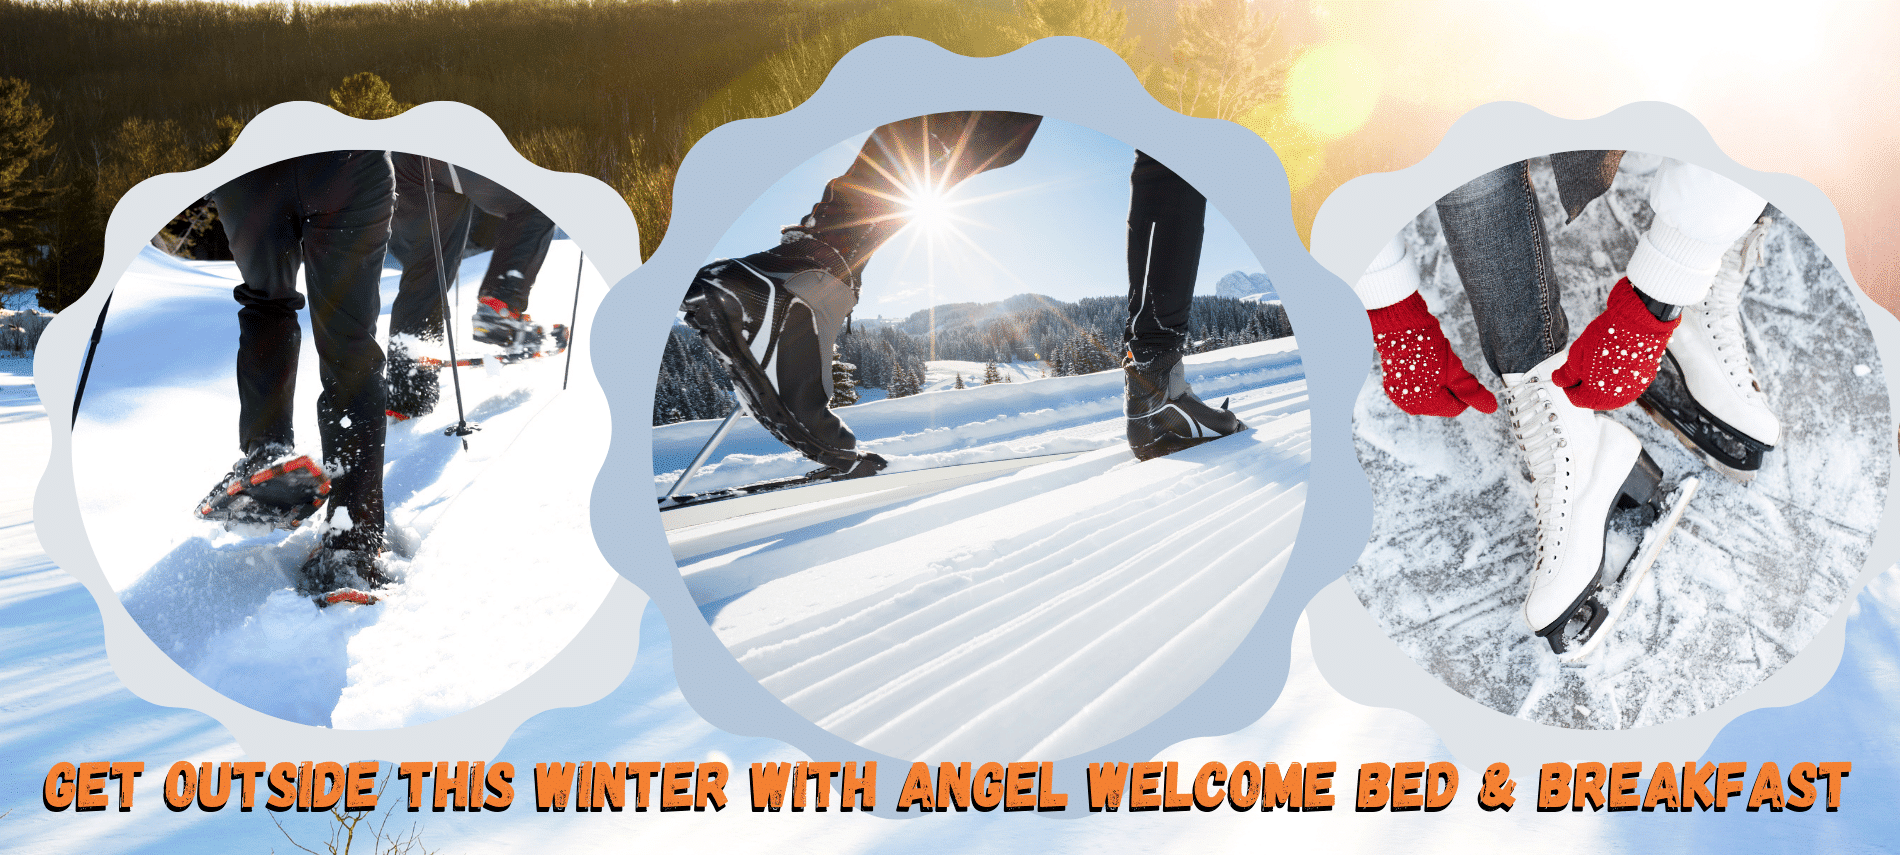 Collage of snow-shoeing, cross-country skiing and ice skates on a winter background.